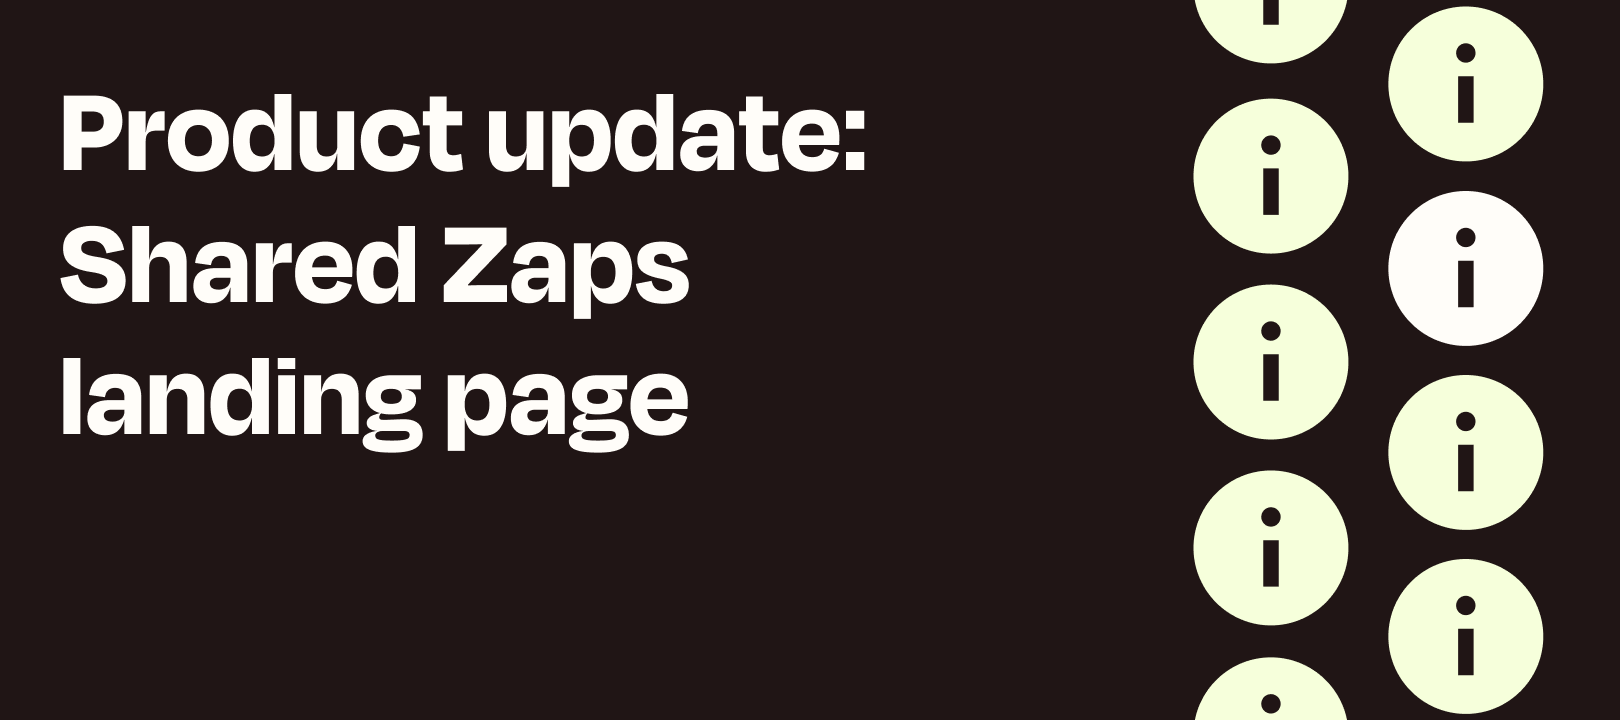 Introducing Improved Shared Zap Landing Pages and Announcing our first Zap Sharing Webinar!